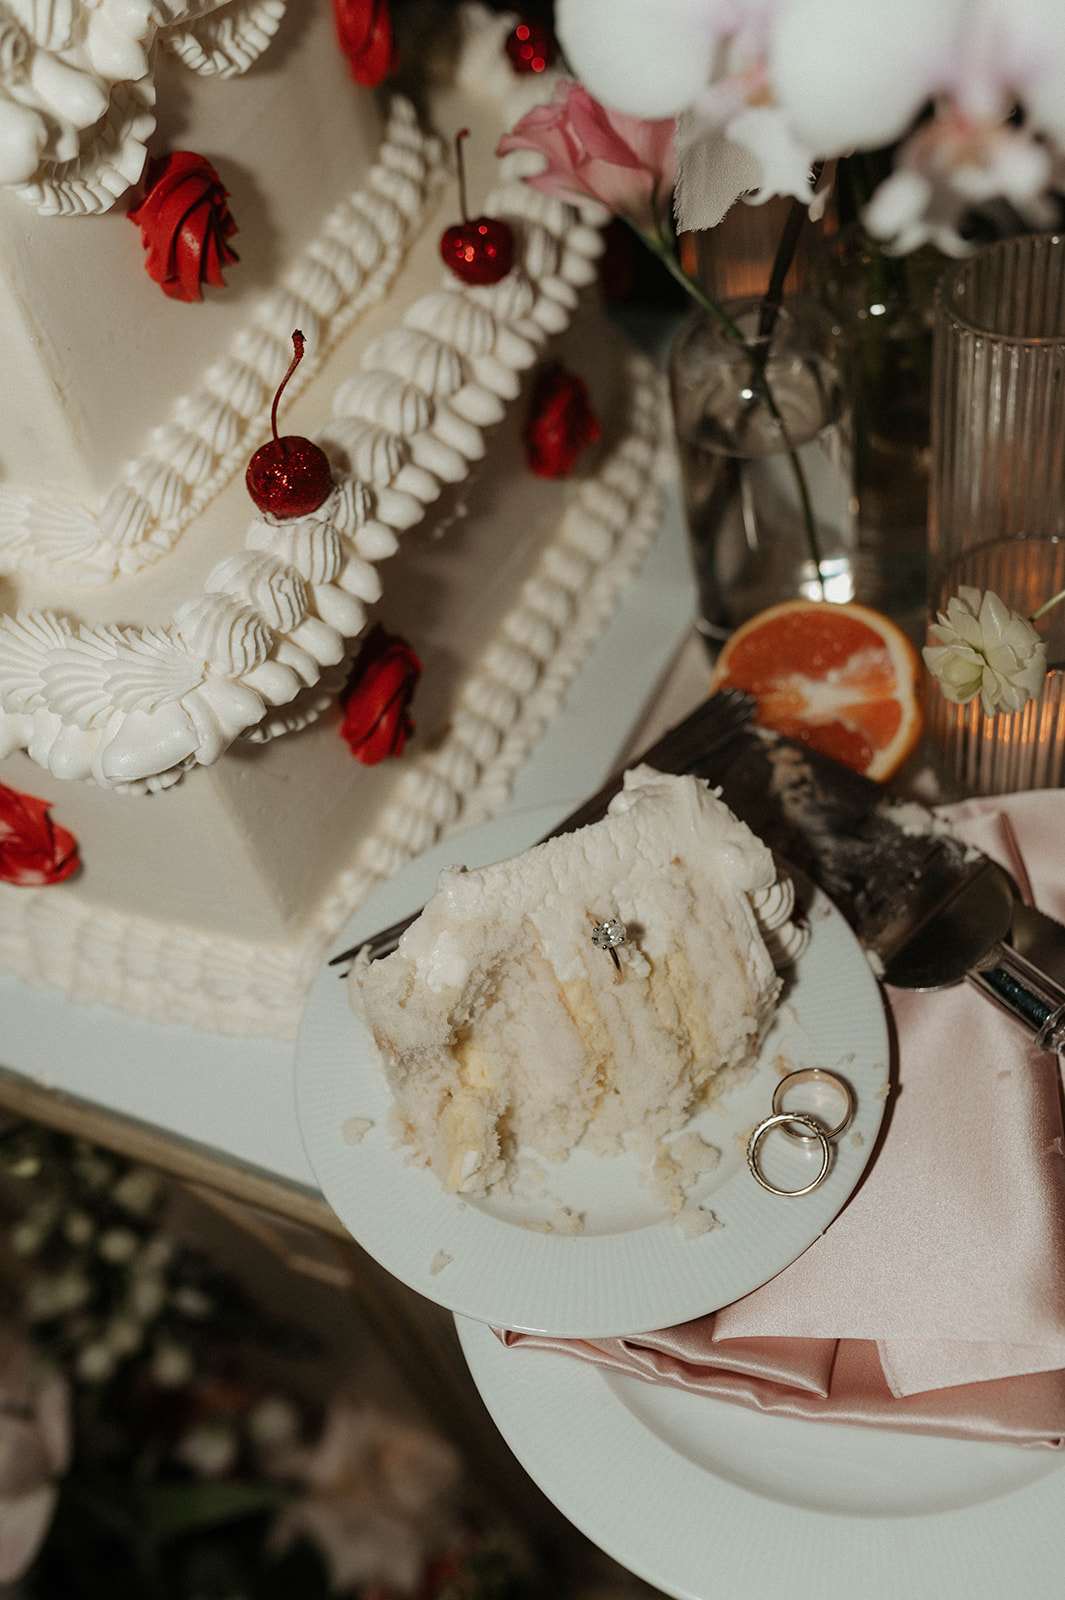 A multi-tiered white wedding cake adorned with red and white decorations, displayed on an ornate table surrounded by lit candles and floral arrangements, in a richly decorated room.